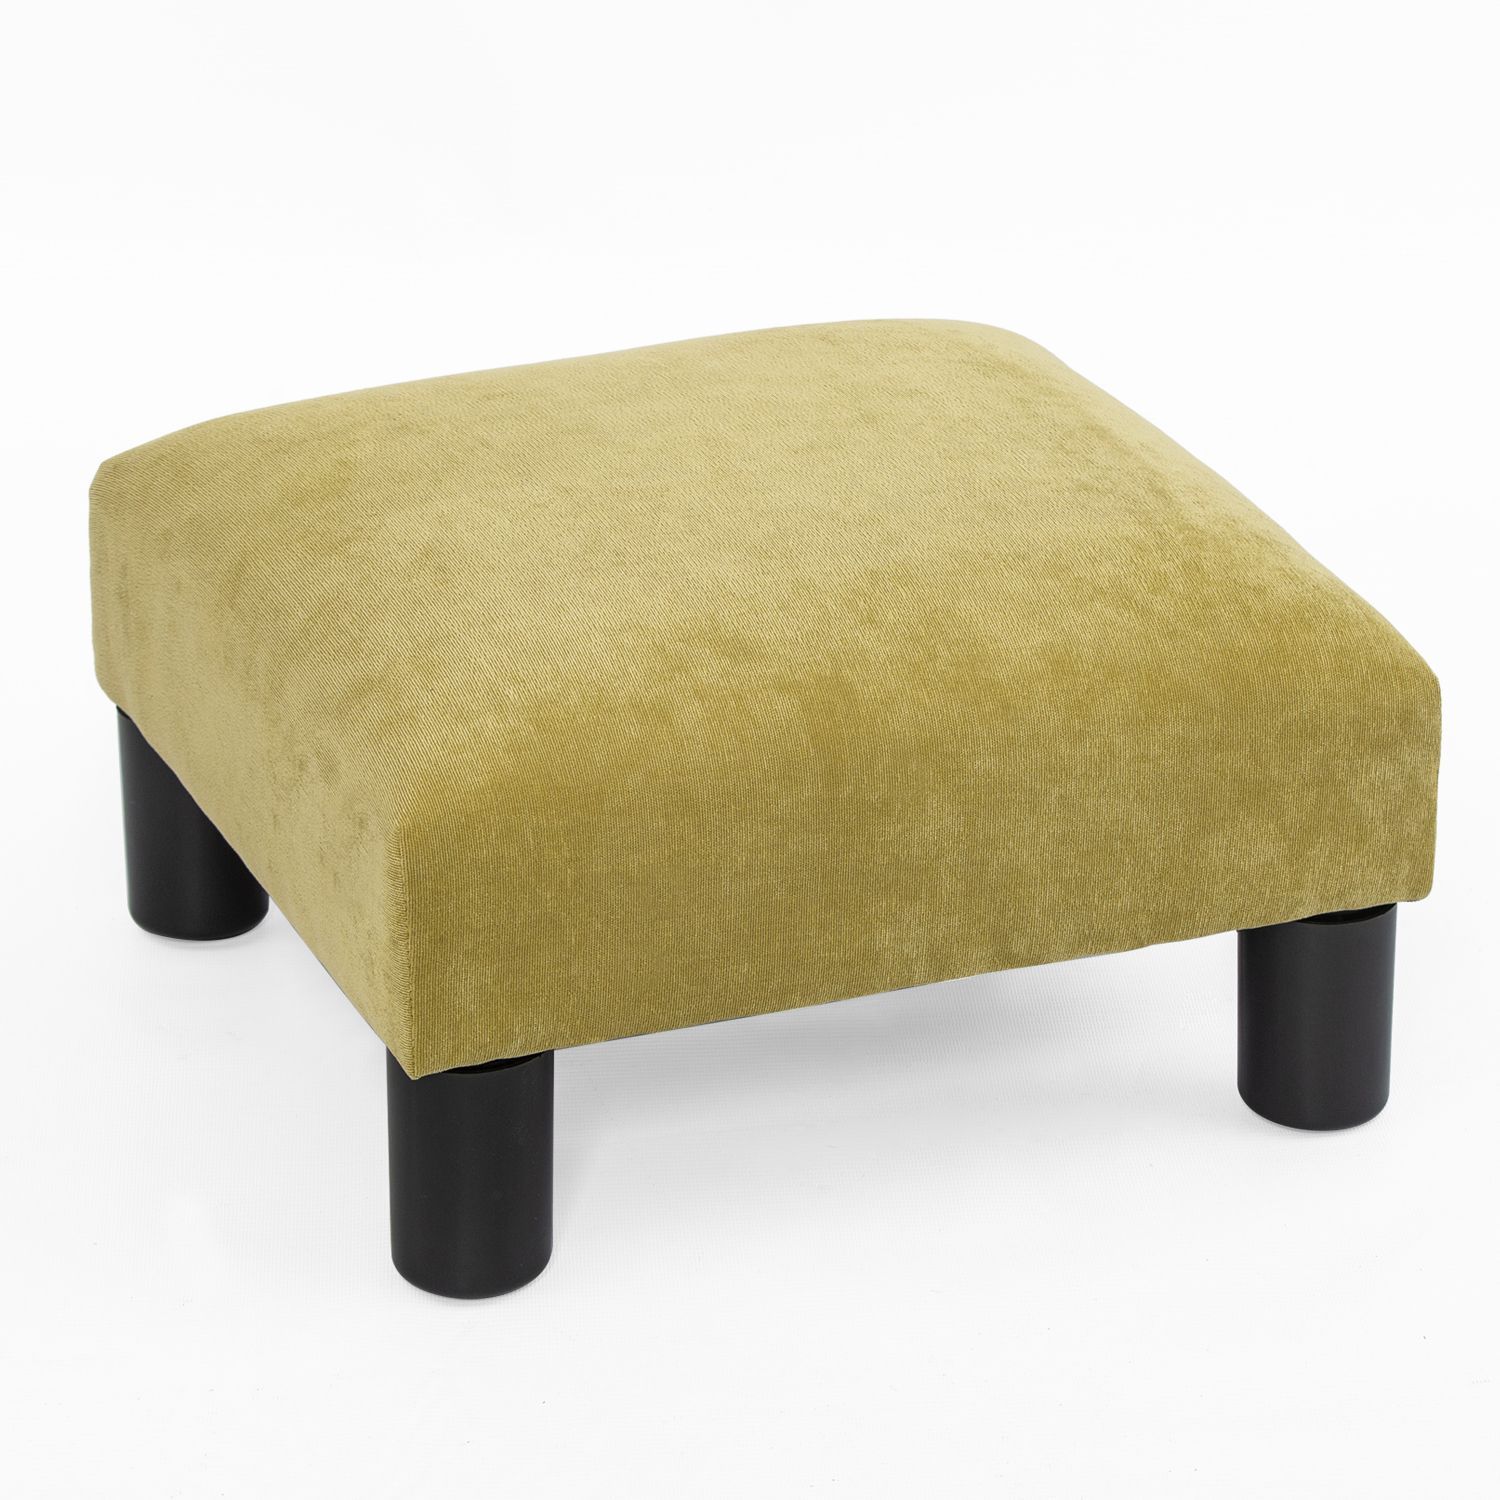 Best And Newest Green Pouf Ottomans In Joveco Small Ottoman With Wood Legs – Footstool/footrest – Geometric (View 9 of 10)